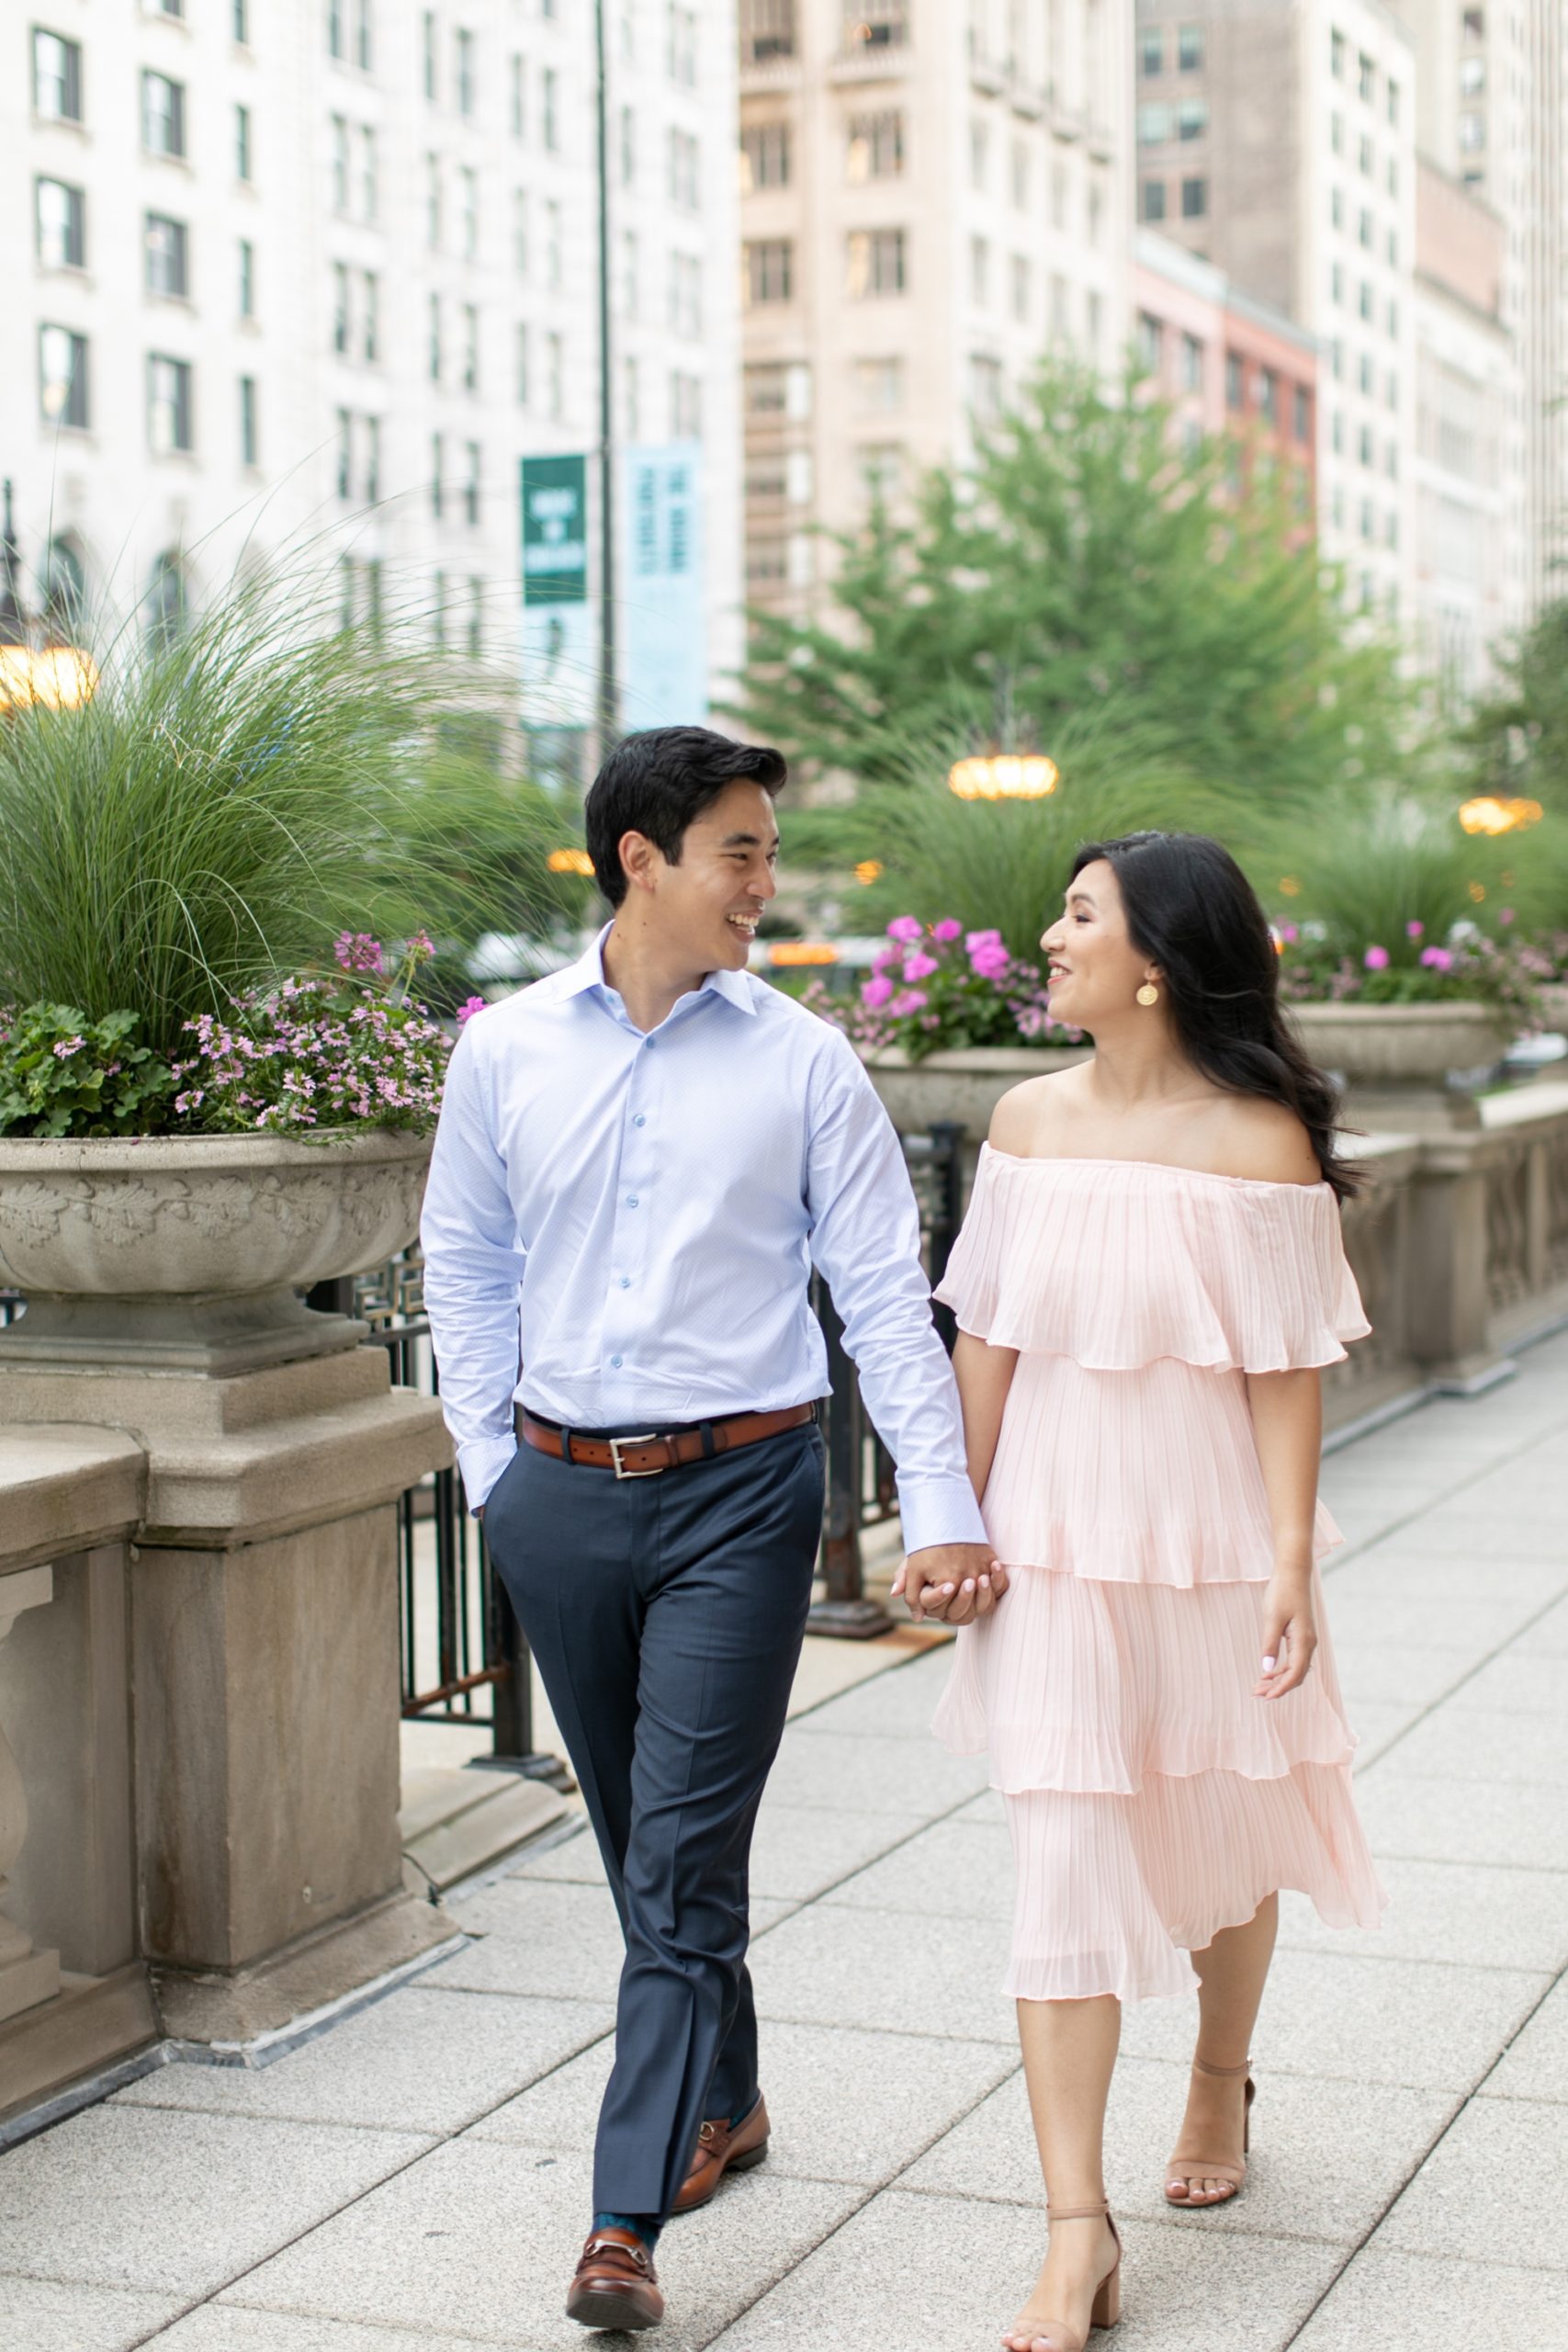 downtown summer engagement photos in chicago